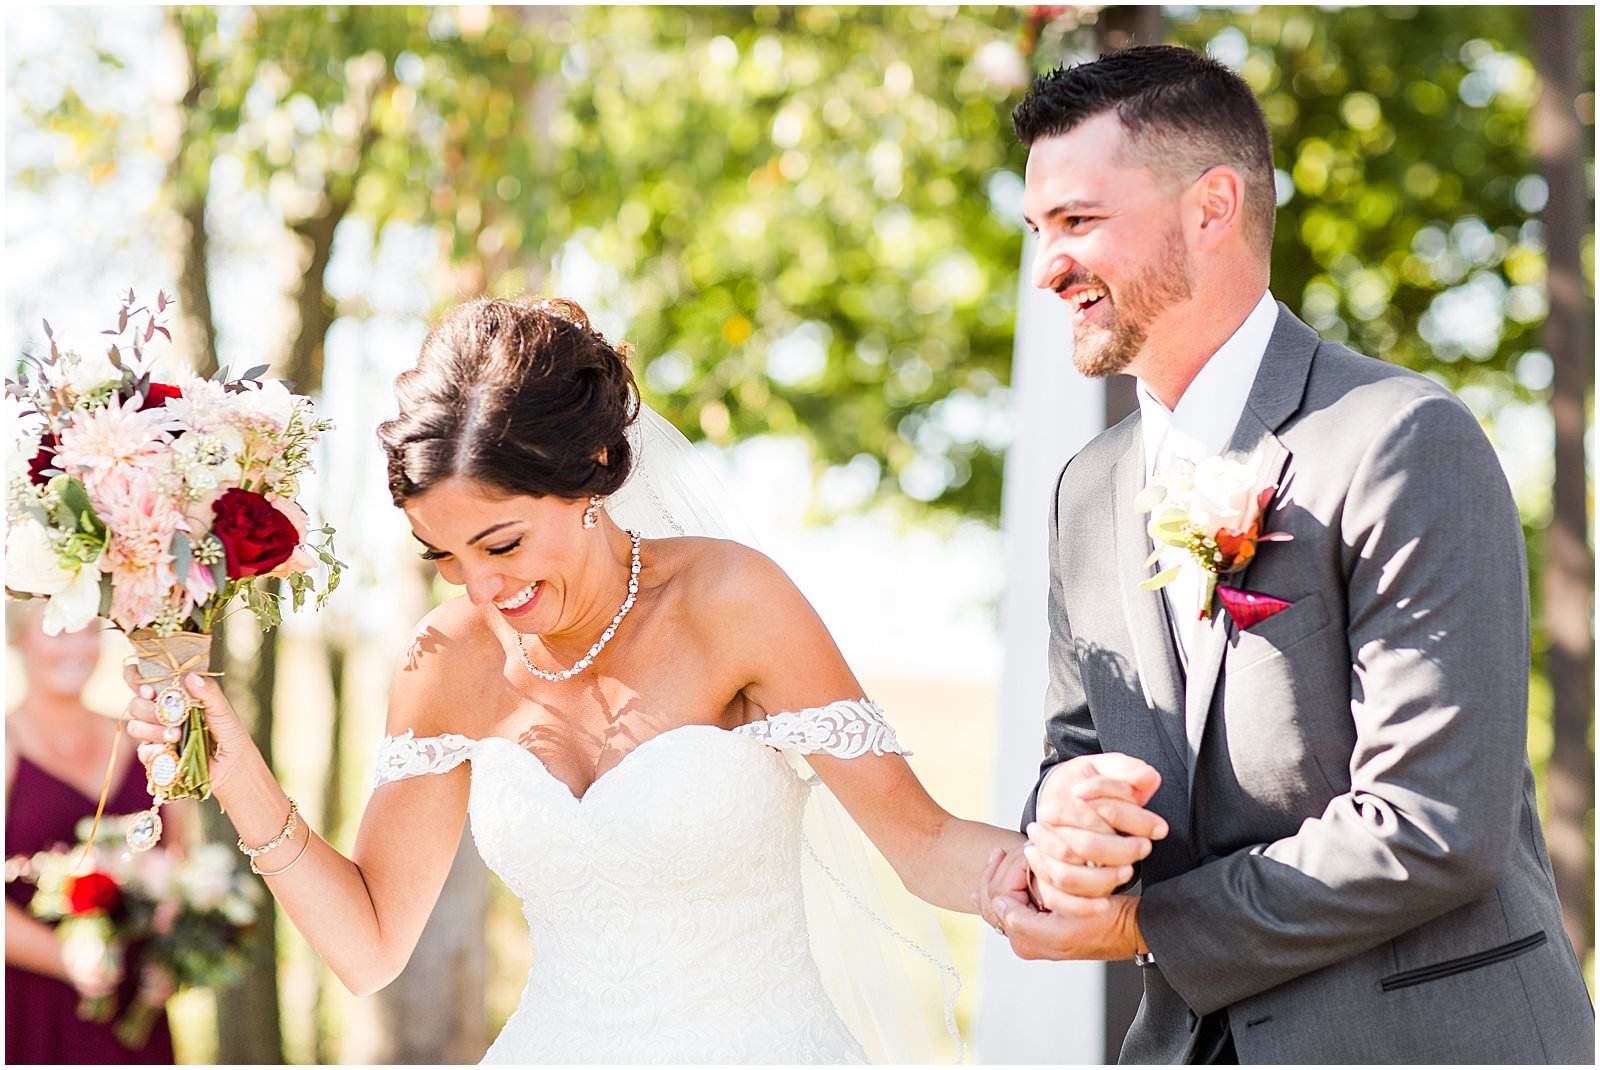 A Stunning Fall Wedding in Indianapolis, IN |. Sally and Andrew | Bret and Brandie Photography 0109.jpg